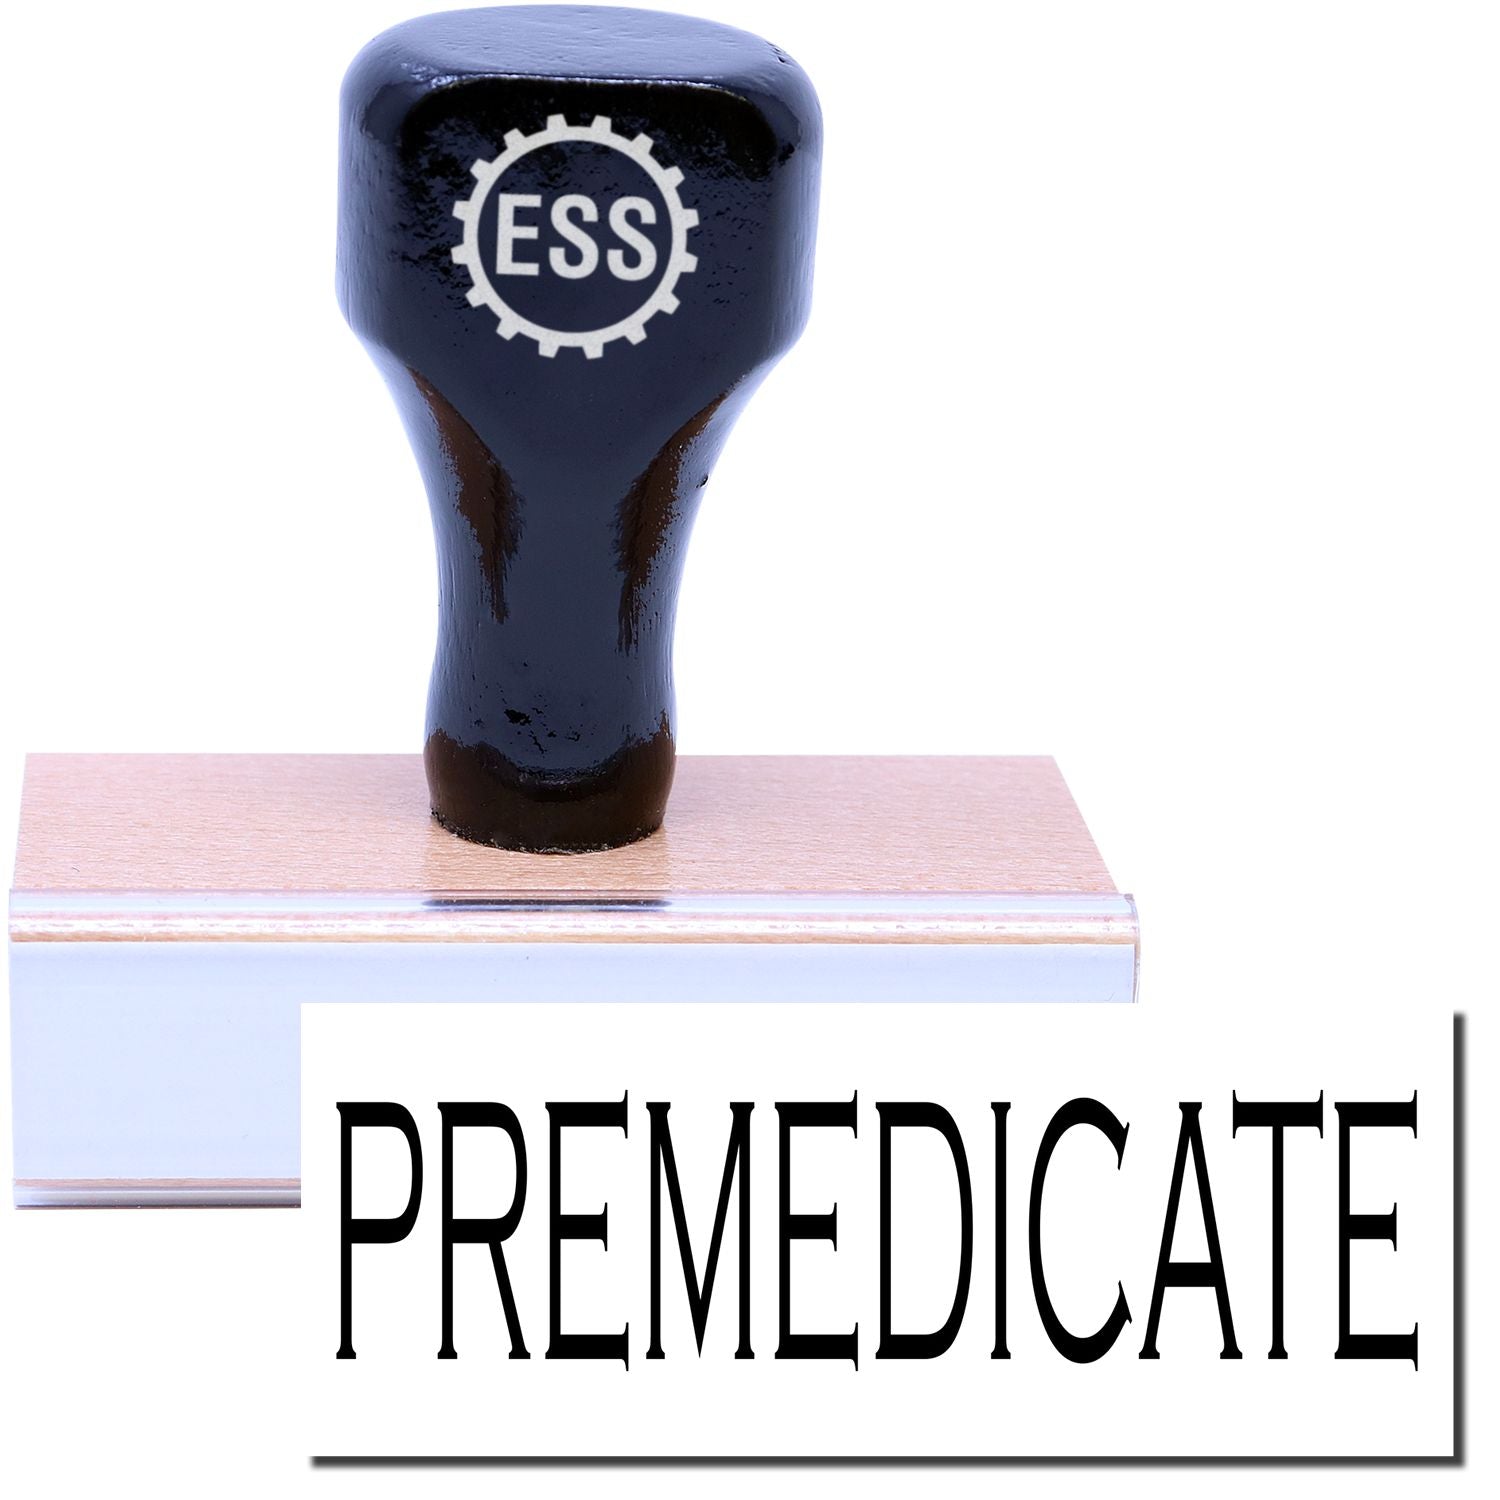 A stock office rubber stamp with a stamped image showing how the text "PREMEDICATE" is displayed after stamping.